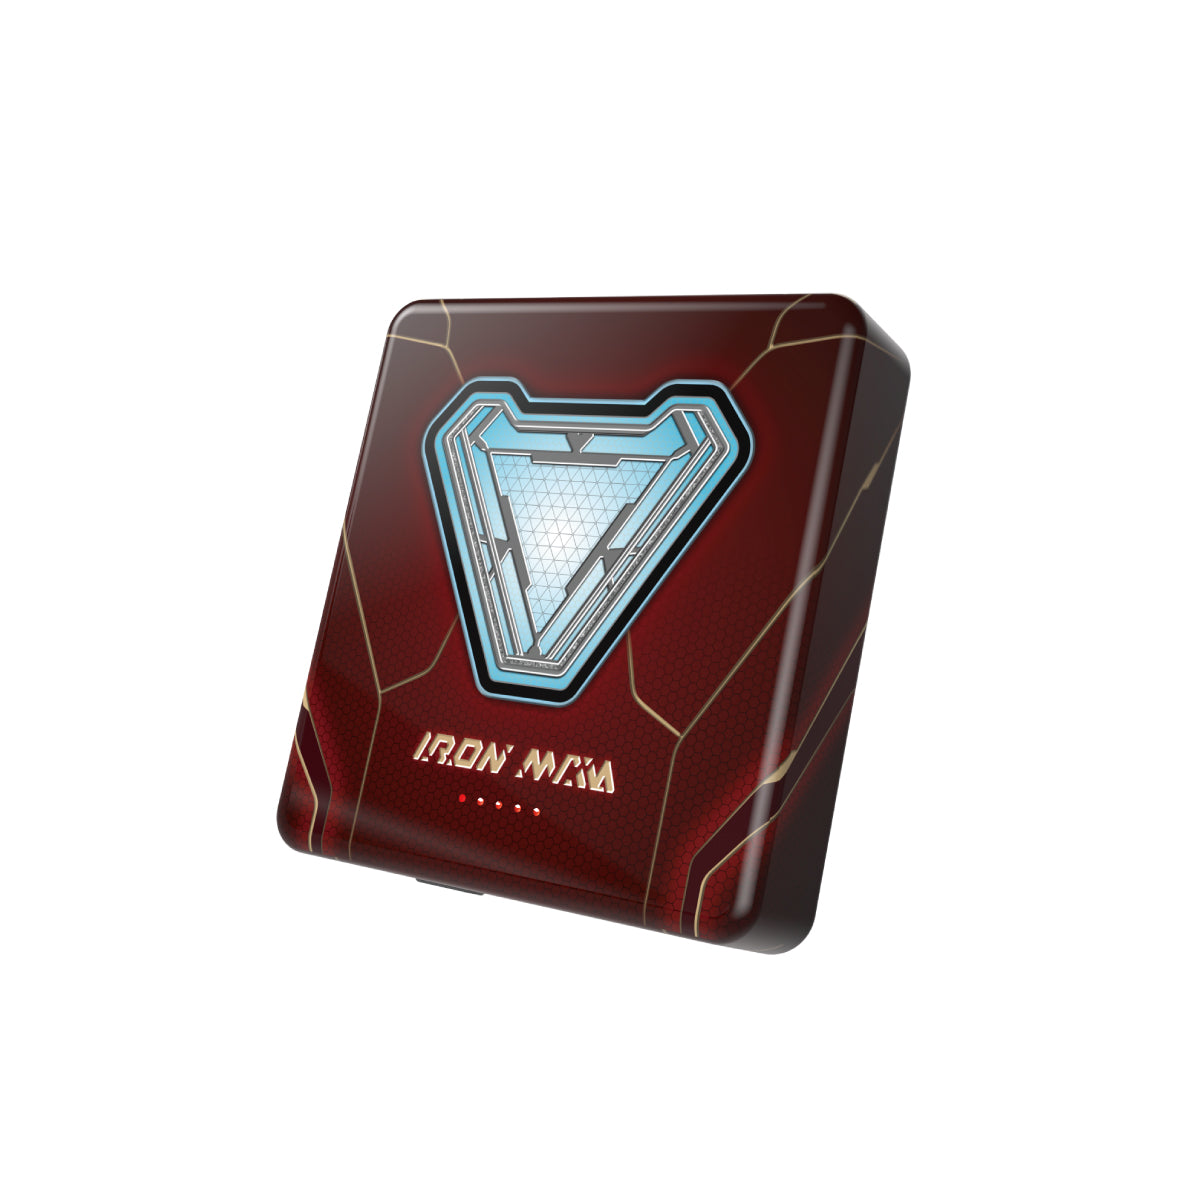 【LIMITED EDITION】Marvel Magnetic Wireless Powerbank - Iron Man